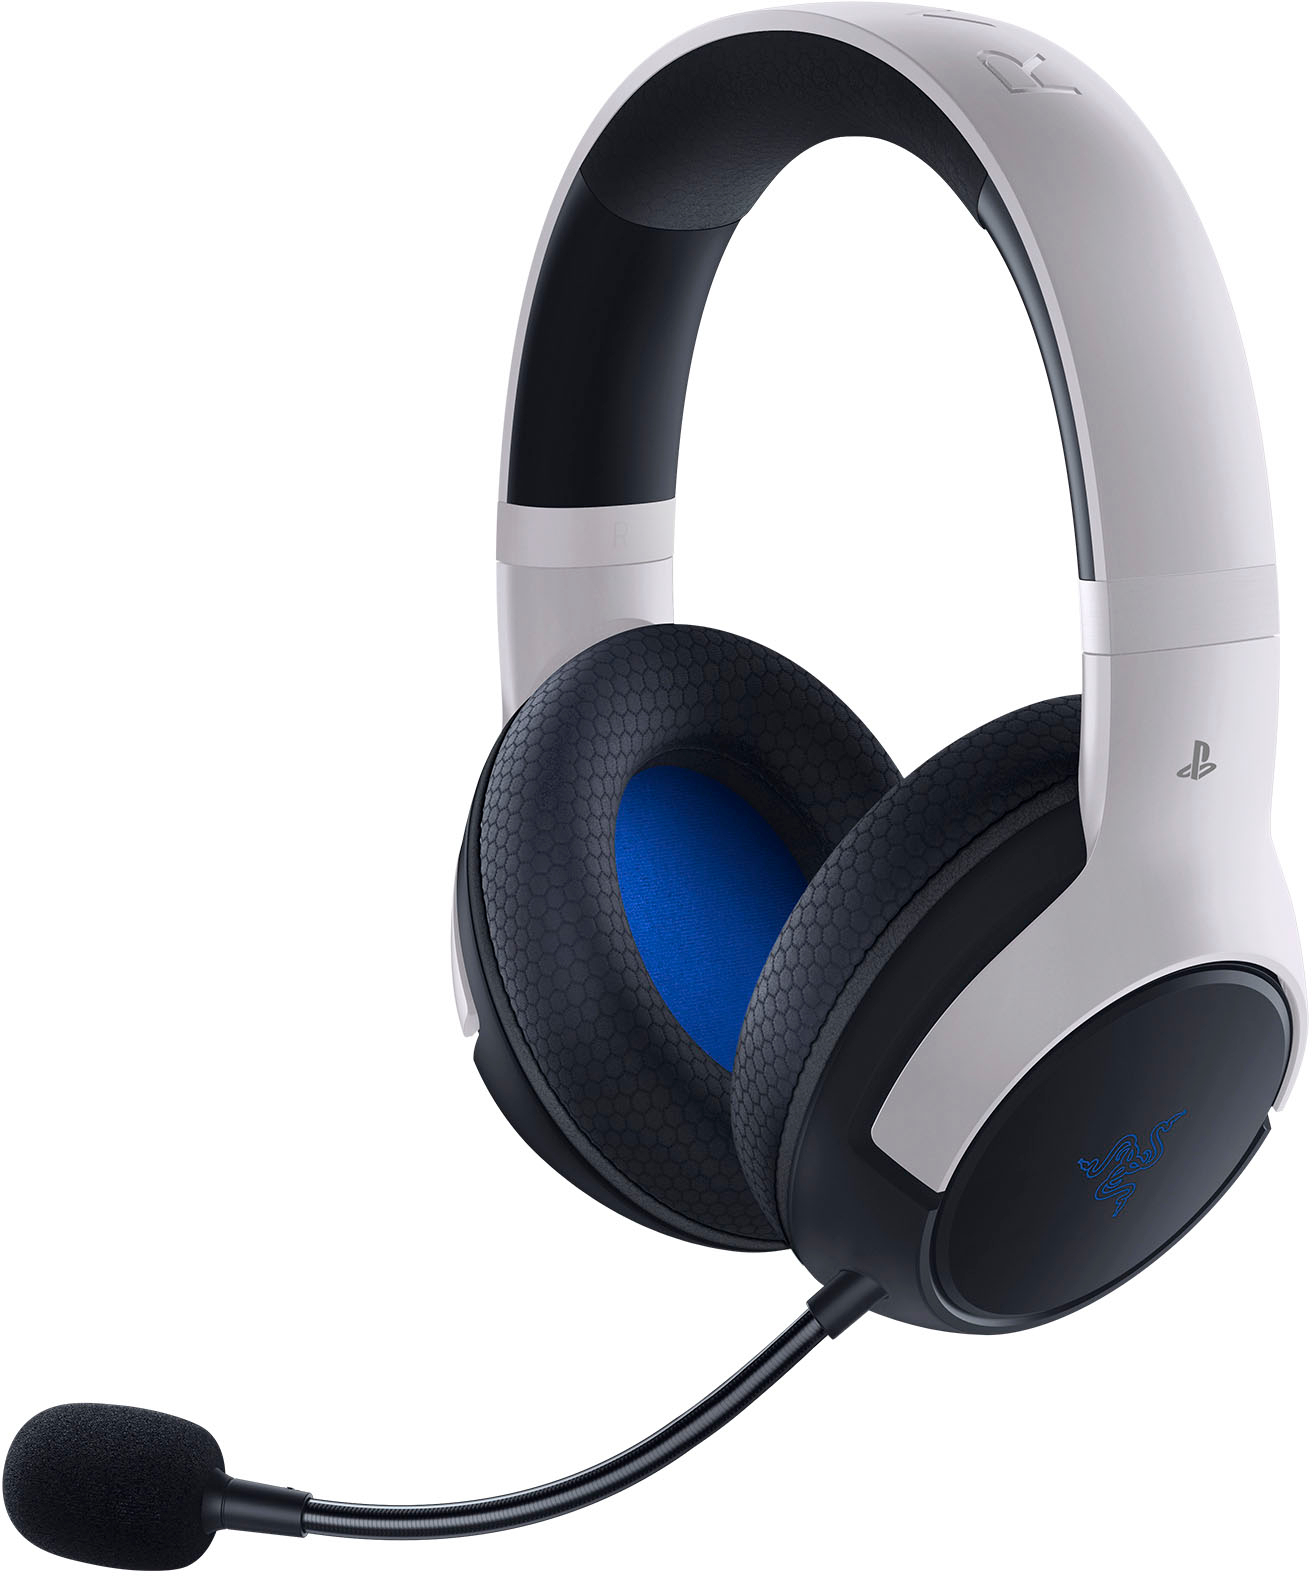 Converge Ubestemt have på Razer Kaira HyperSpeed Gaming Headset for PS5, PS4, and PC White  RZ04-03980200-R3U1 - Best Buy